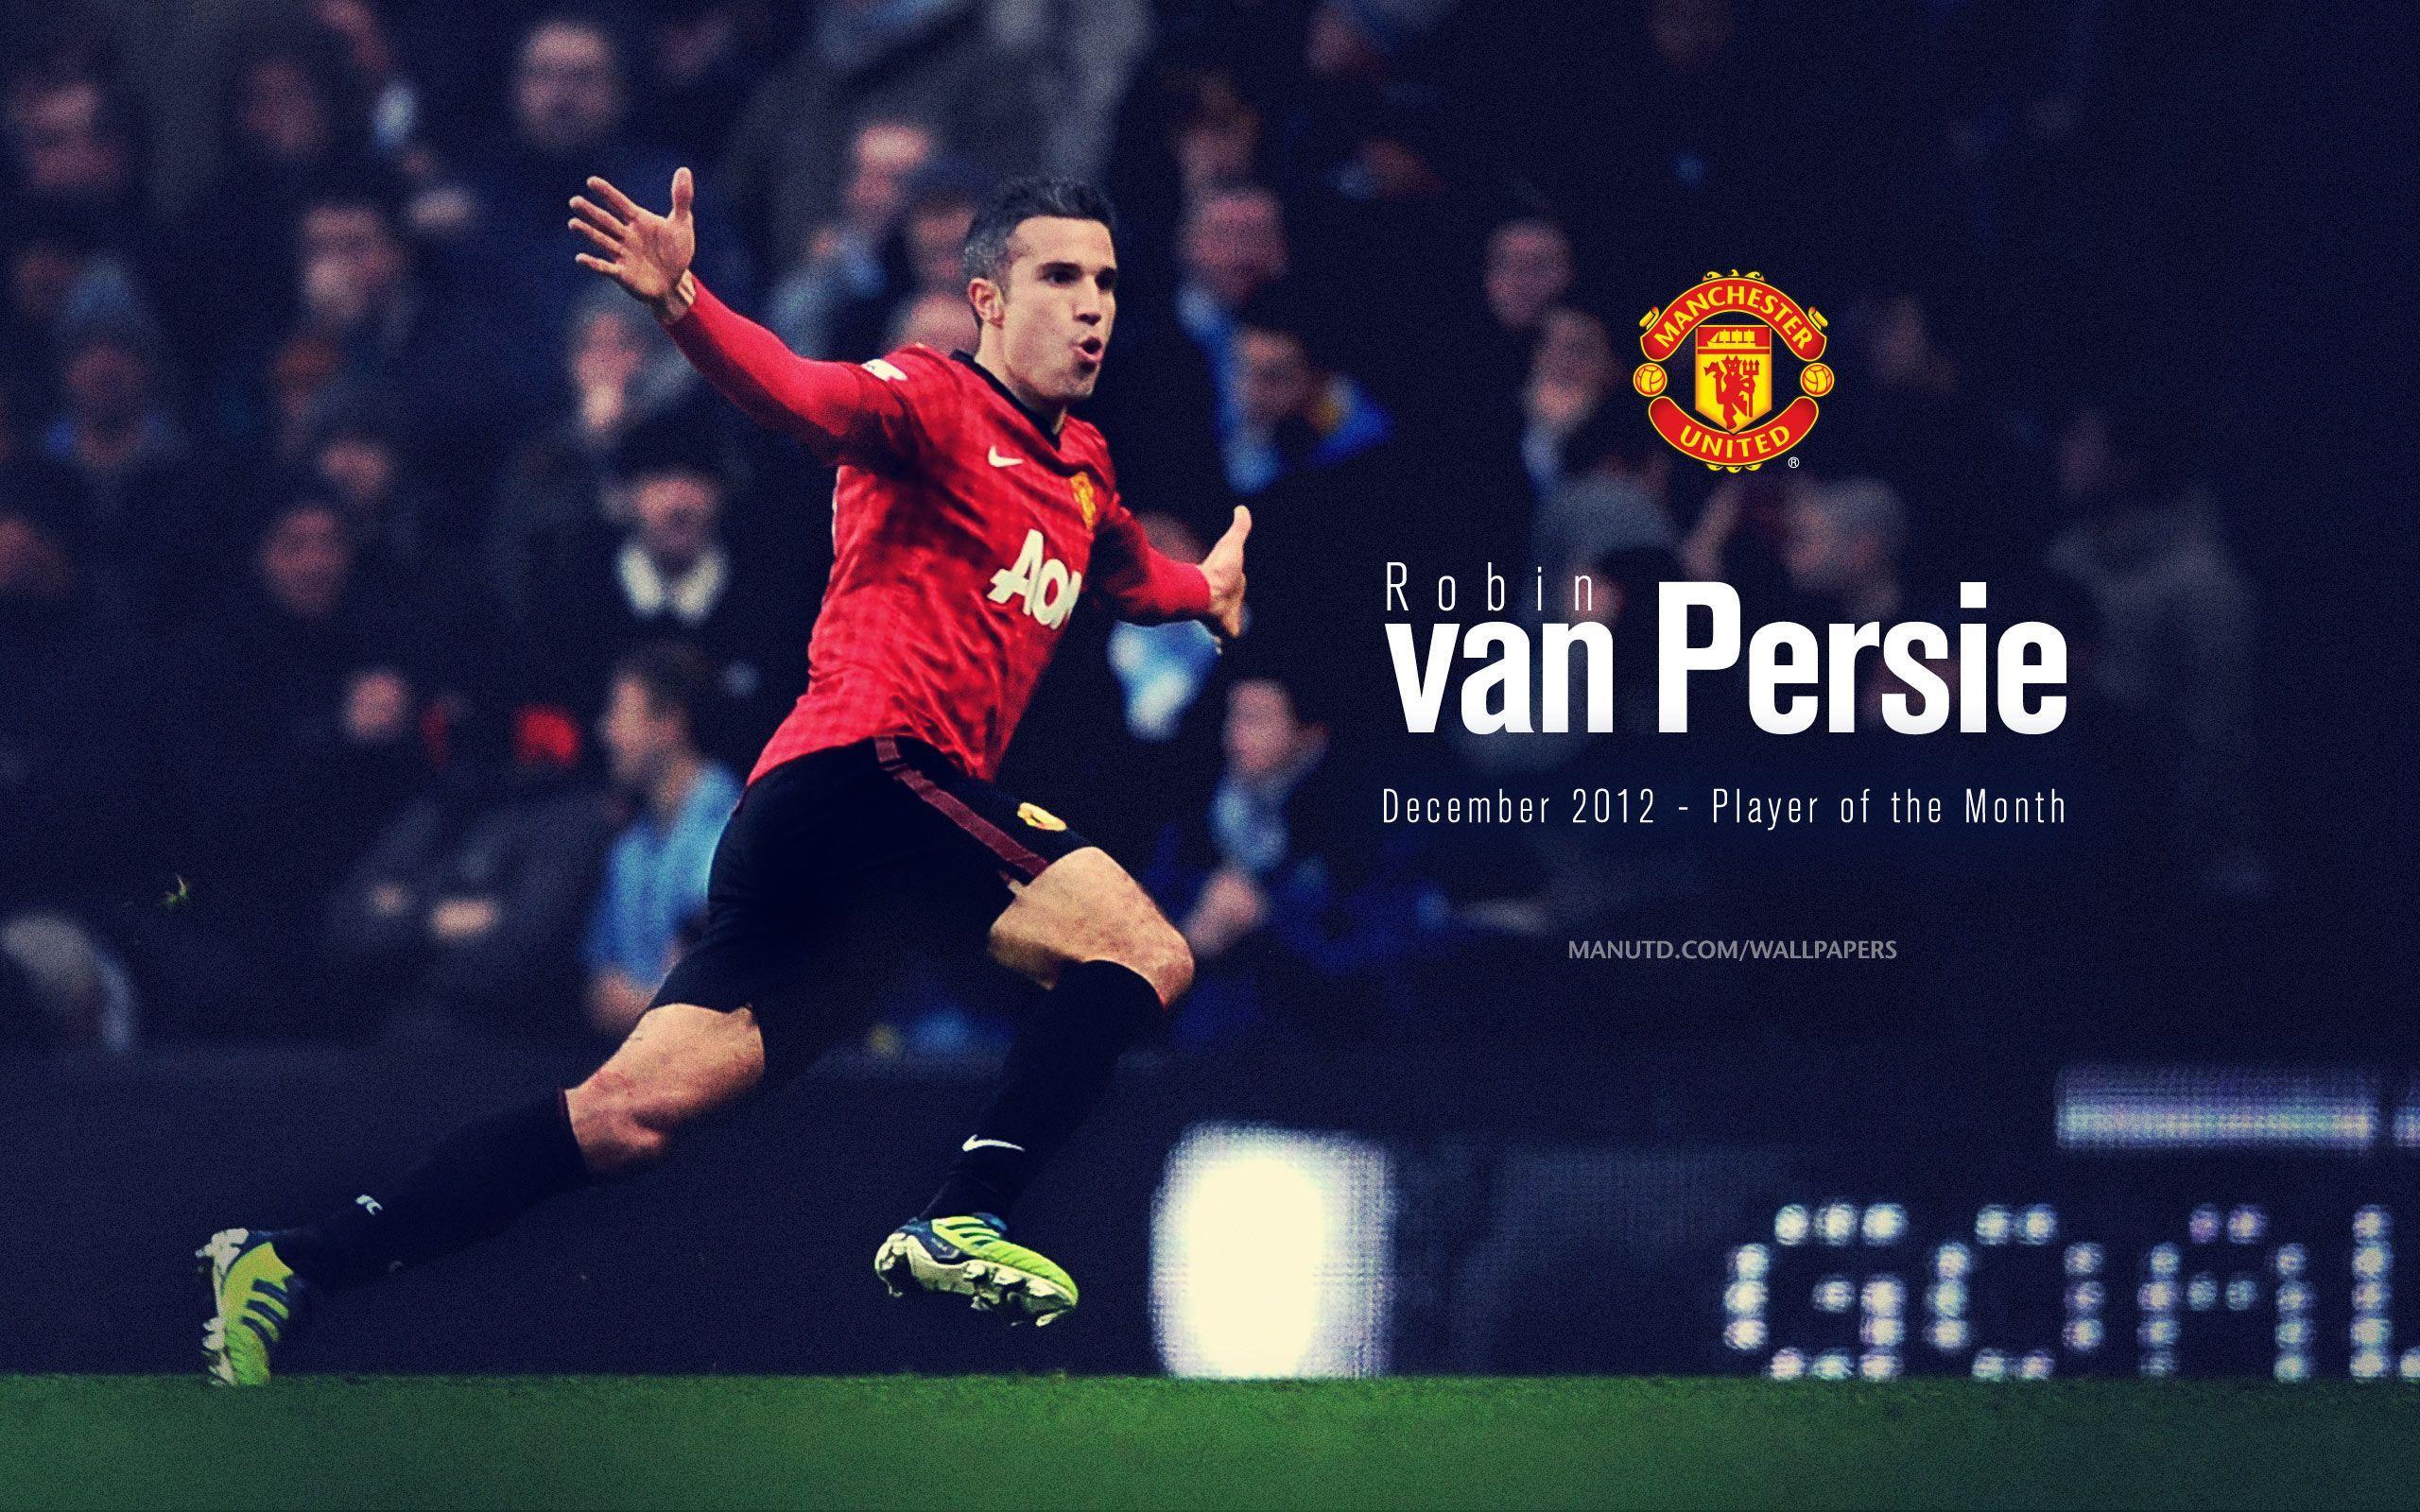 EXCLUSIVE WALLPAPER. MANCHESTER UNITED PLAYER OF THE MONTH